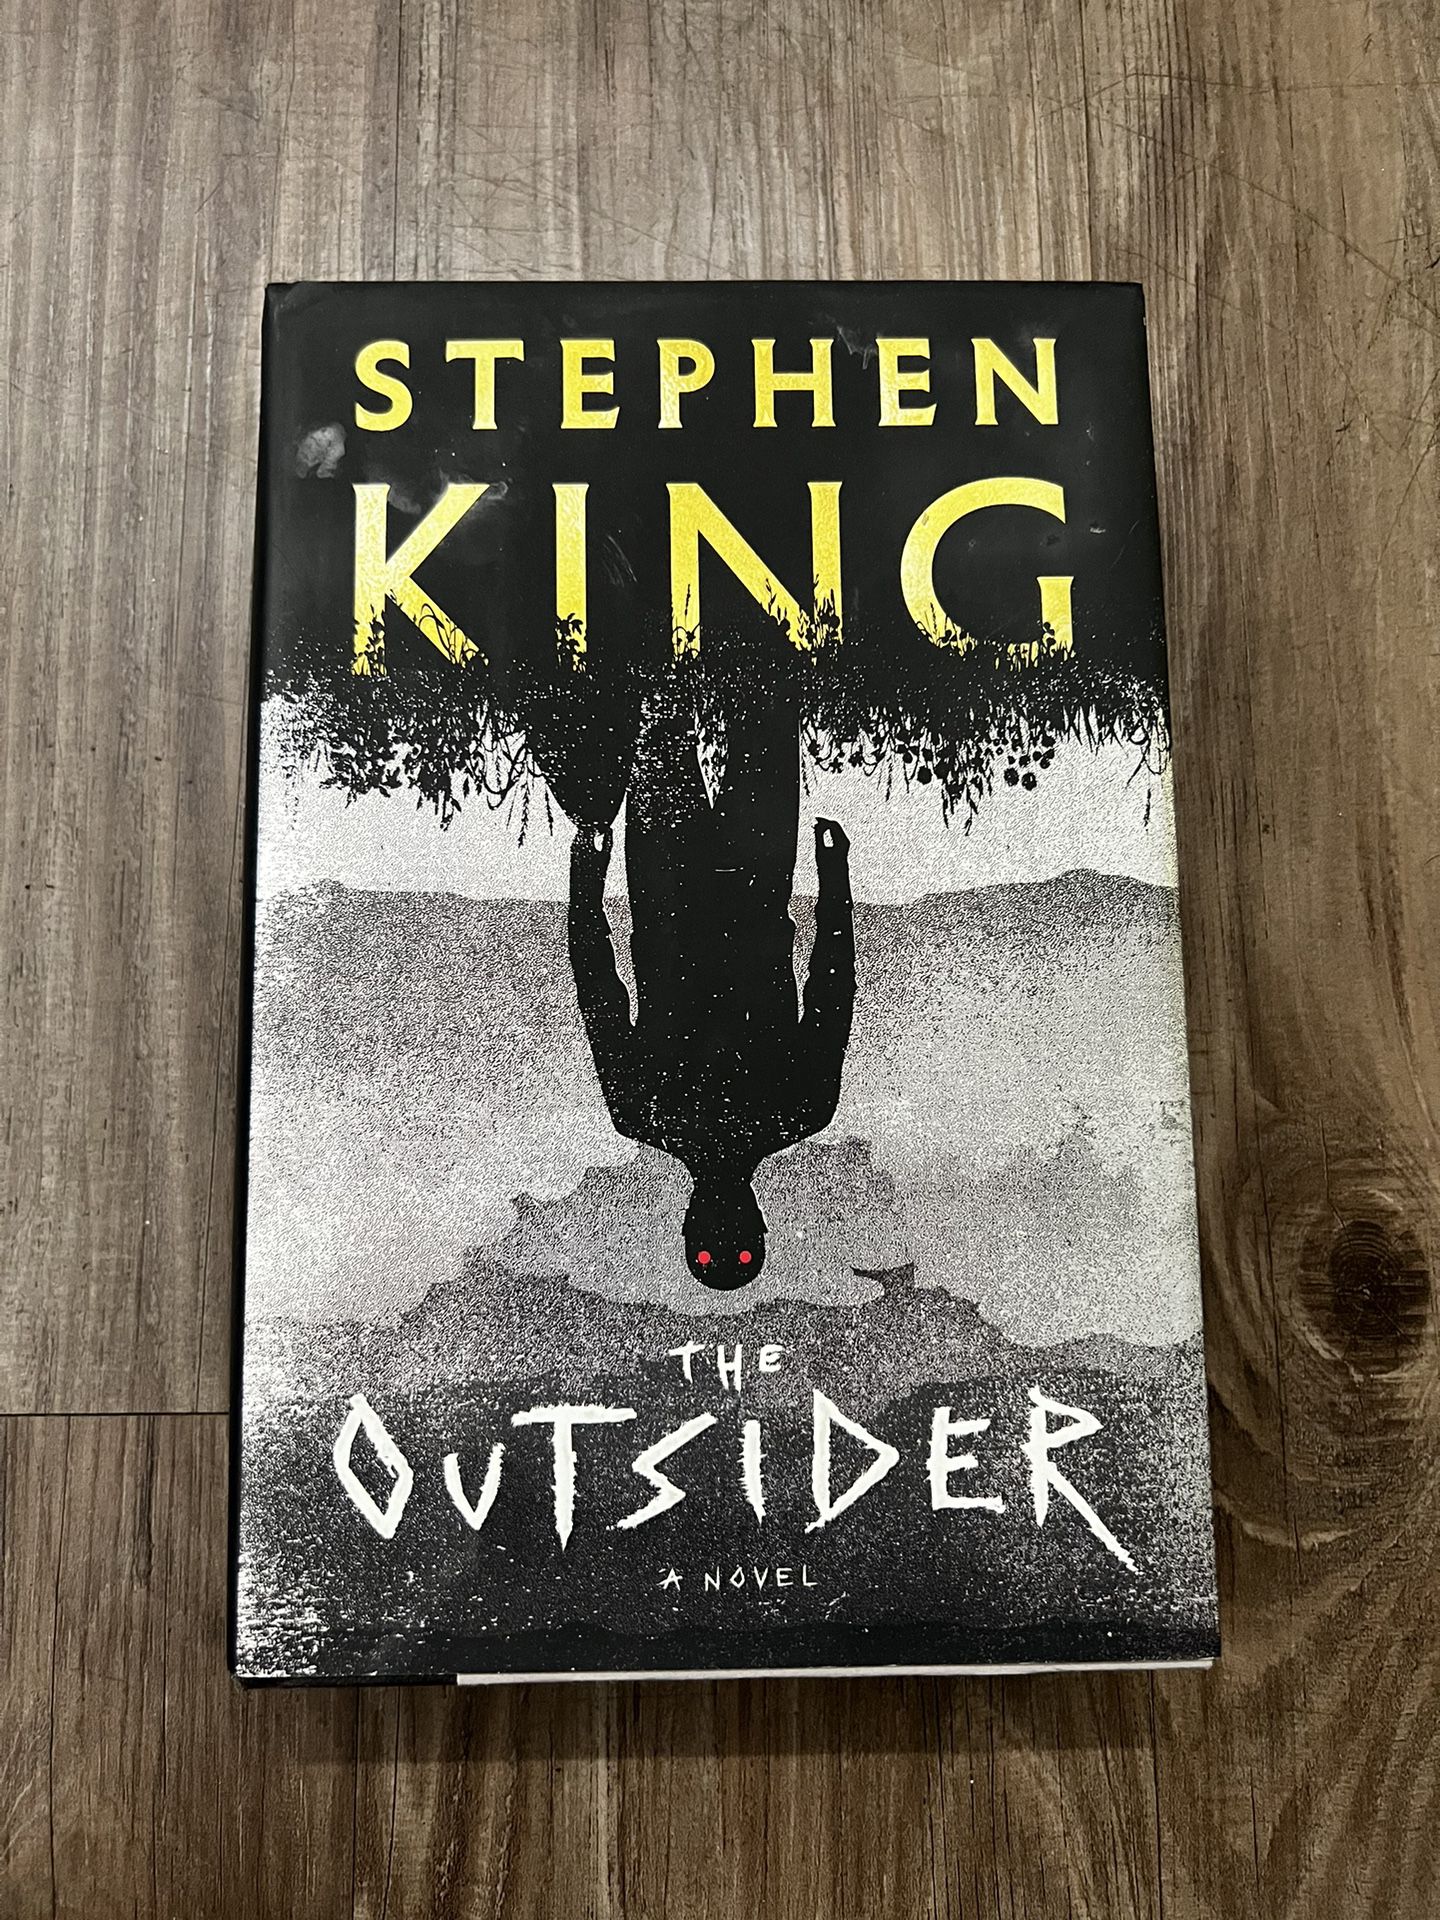 The Outsider - Stephen King Hardcover Book 